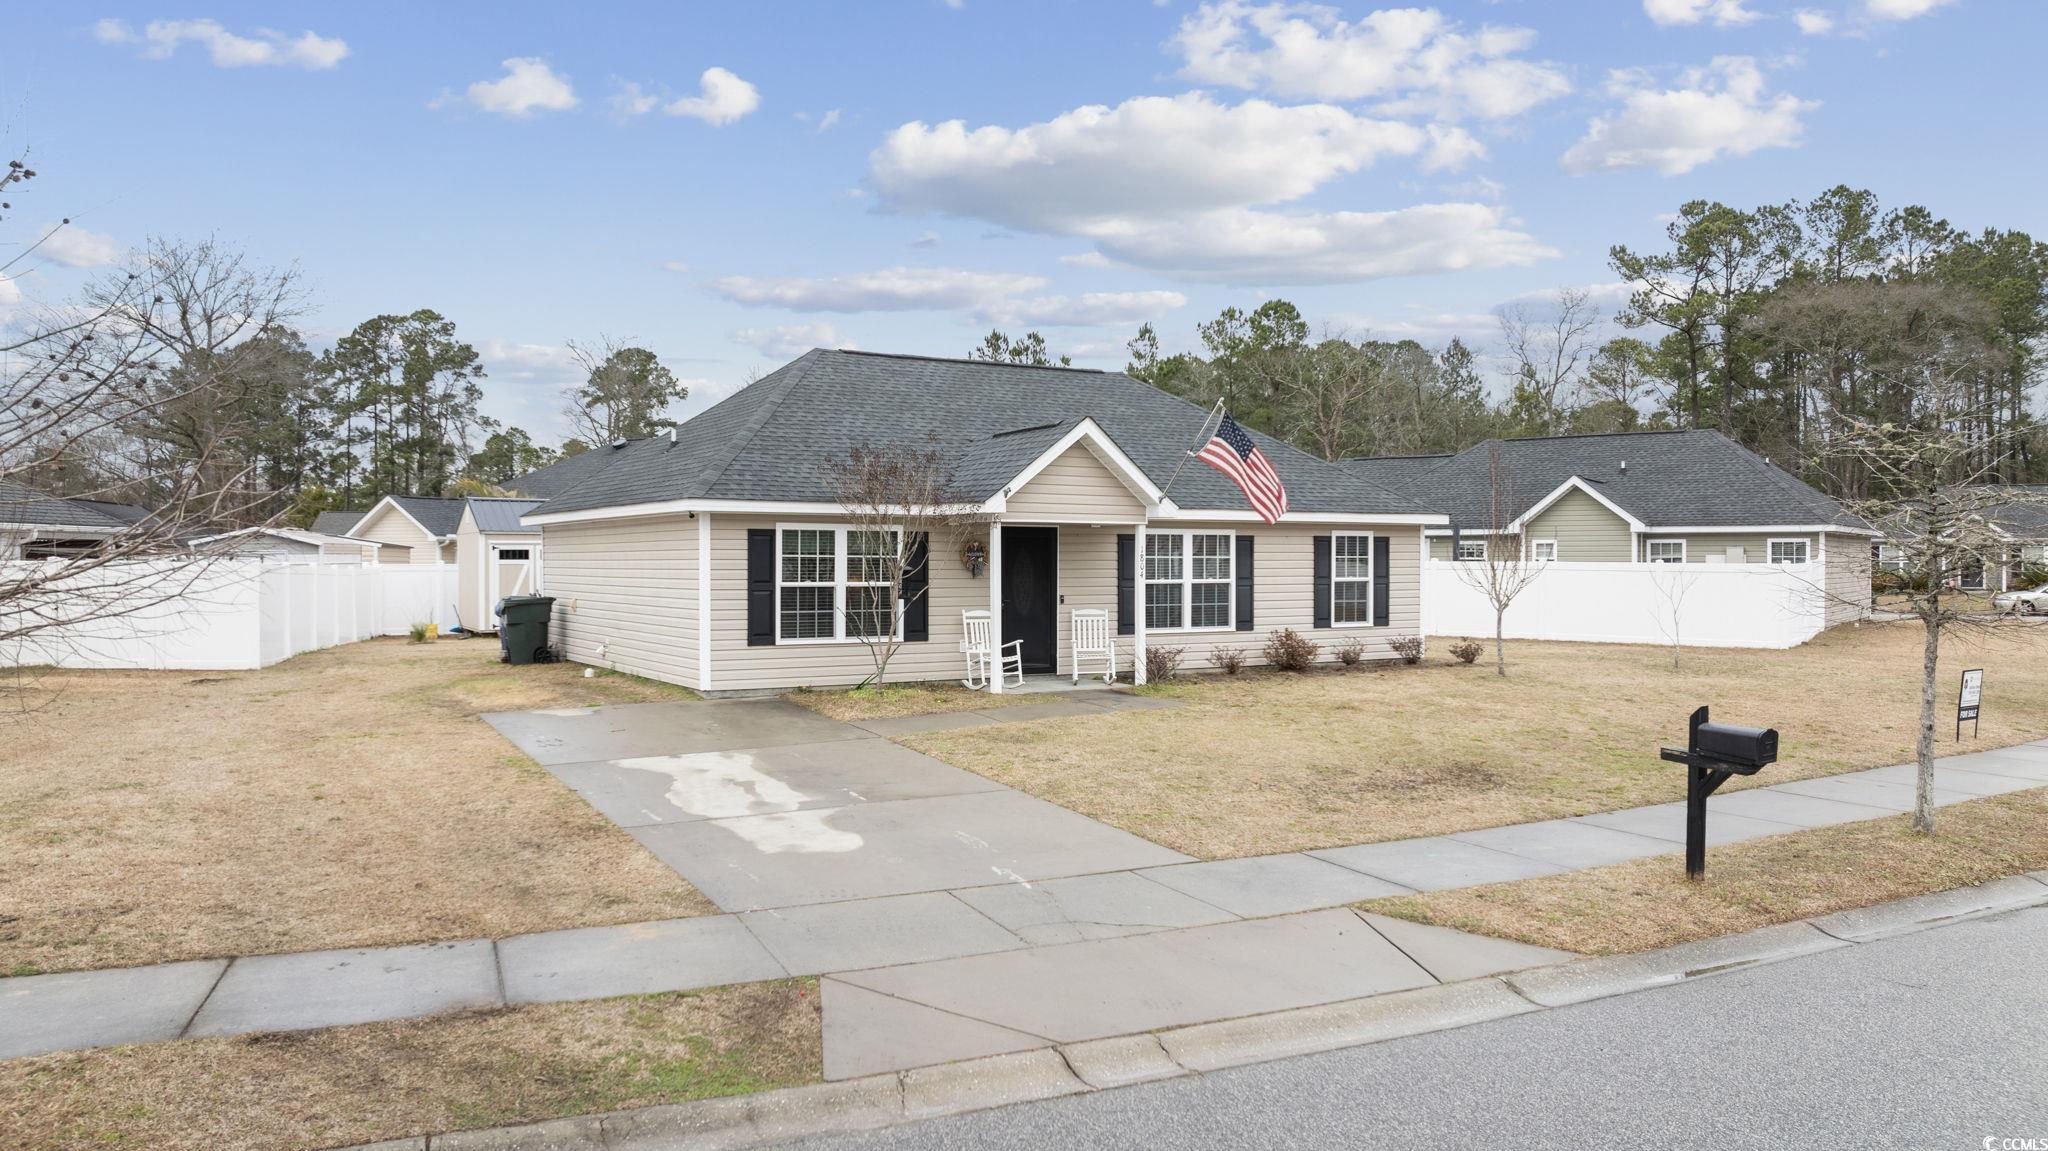 welcome to 1804 ambridge dr, conway, sc 29527! this charming single-family home is a hidden gem that you don't want to miss, with 3 bedrooms and 2 bathrooms. as you step inside, you will be greeted by an abundance of natural light that flows through the home, creating a warm and inviting atmosphere. the open floor plan seamlessly connects the living, dining, and kitchen areas, creating a perfect flow of space. the kitchen is featuring top-of-the-line lg appliances, a single basin sink, and gorgeous stone countertops. one of the highlights of this property is the back patio, where you can relax under the pergola, that boasts muscadine grapes, and enjoy the peaceful outdoors. situated on a sizable lot spanning 74,052 sqft. located within the city limits, this property offers the convenience of being close to all amenities and attractions. you'll love the proximity to riverfront park, just a short distance away. the riverside trails or enjoy a picnic in the park. there are plenty of restaurants and eateries nearby, including the popular rivertown bistro and bonfire taqueria. now is the time to seize this opportunity and make 1804 ambridge dr your new home. with its desirable location, spacious interior, and modern features, this property won't be on the market for long. don't miss out - schedule a showing today and experience the beauty and convenience this home has to offer.  all measurements/square footage are approximate and not guaranteed. buyer is responsible to verify all information.  call your realtor today and ask to see this as soon as possible.